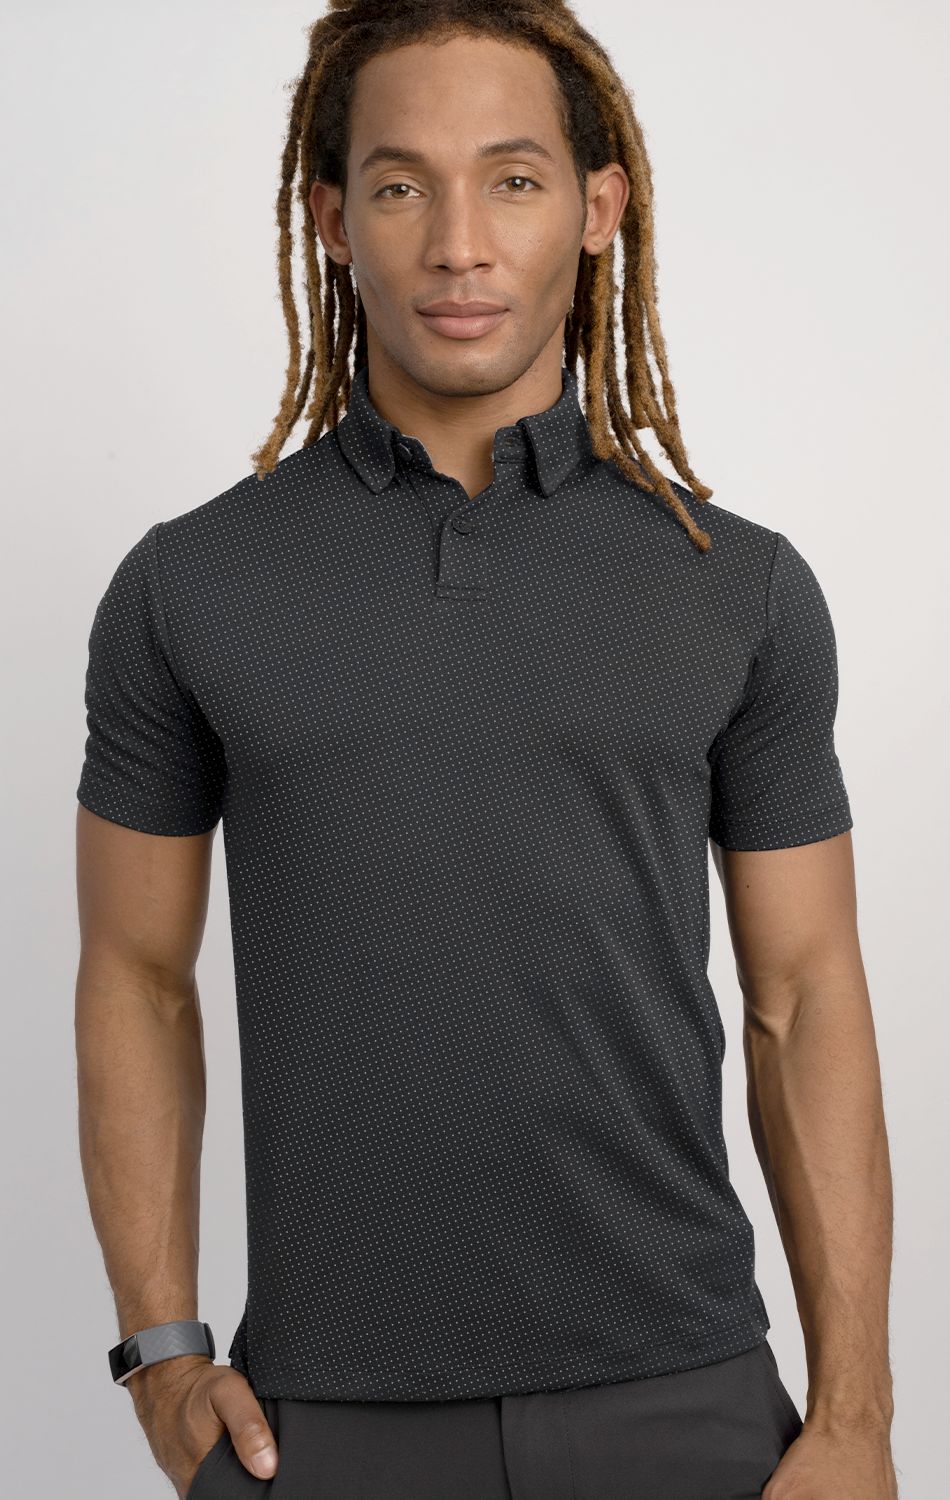 Performance Polo - Patterns